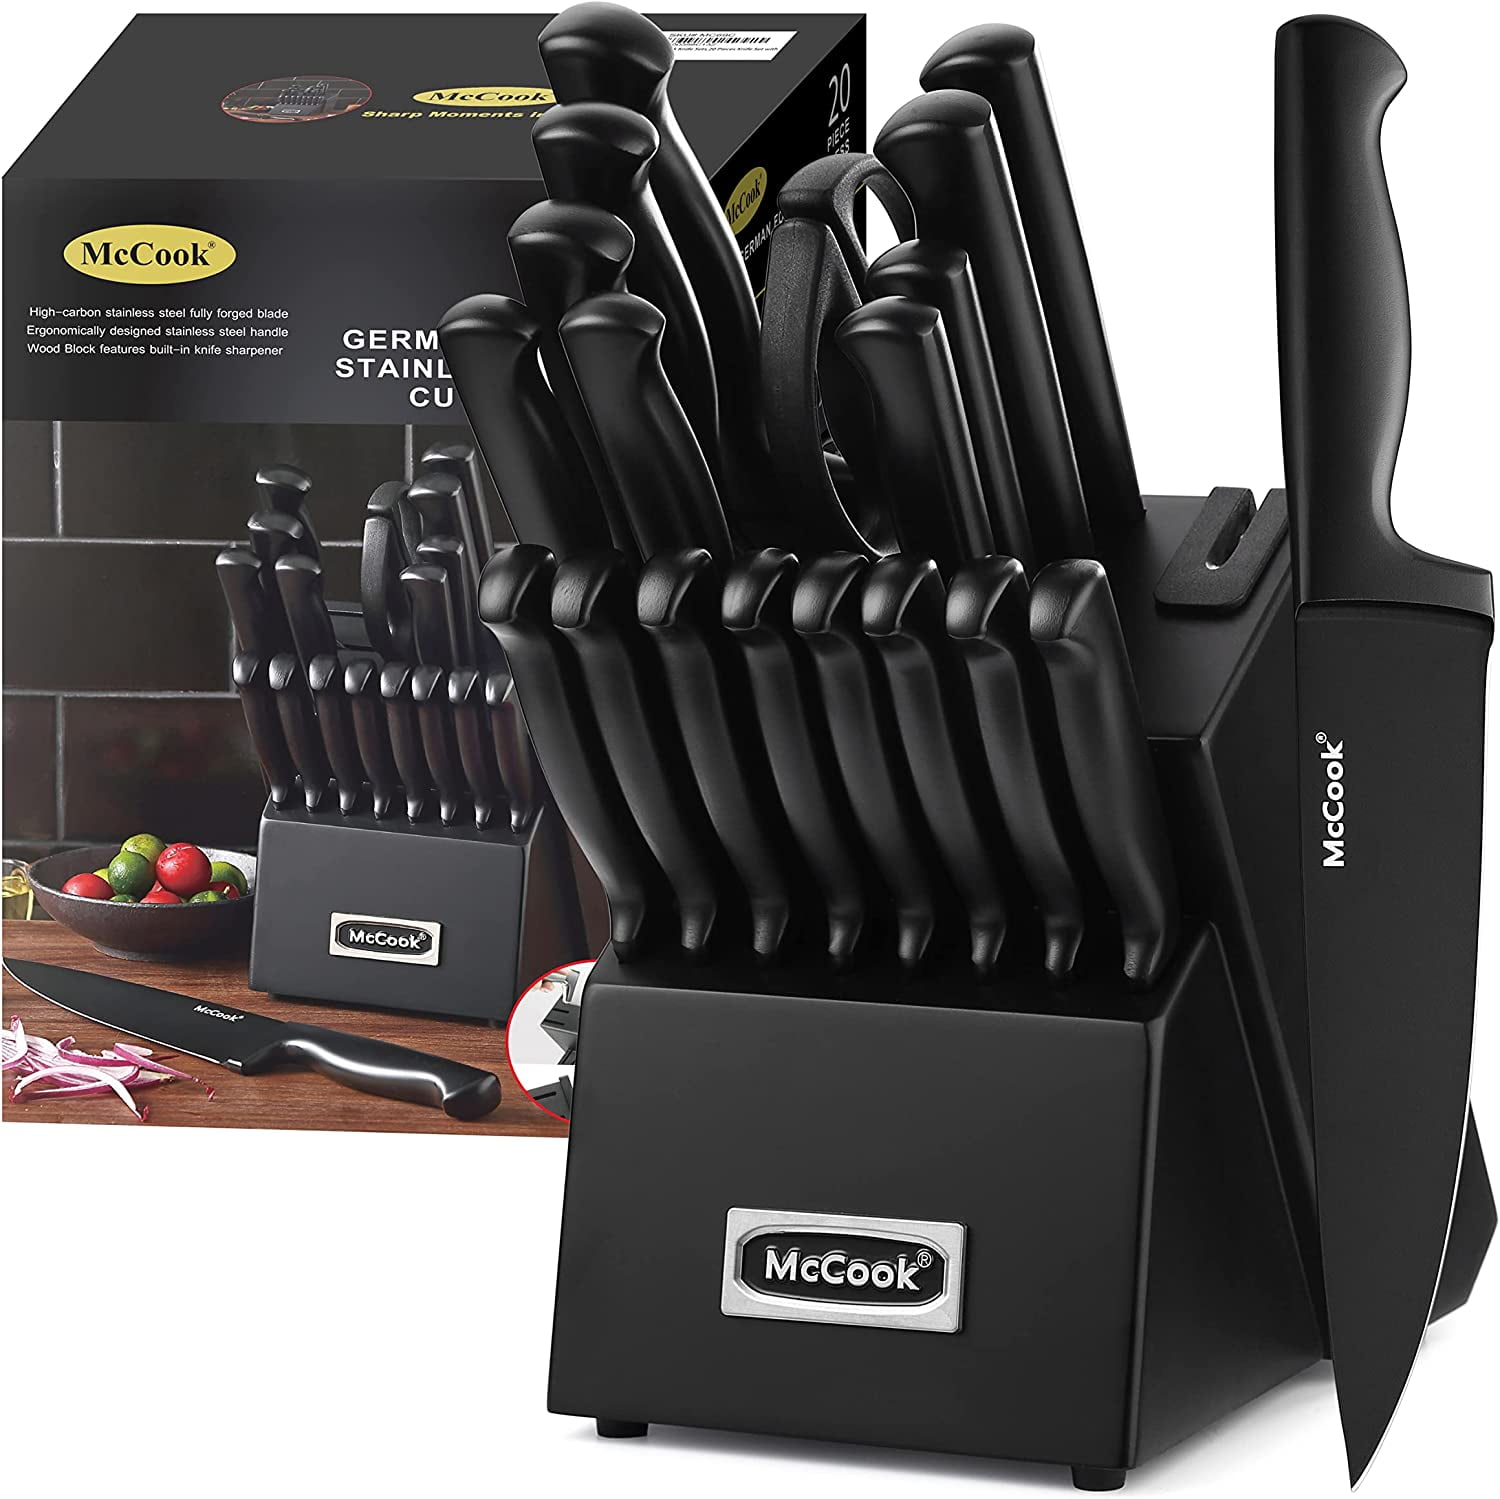 Knife Sets,McCook MC65G 20 Piece German Stainless Steel Forged Kitchen  Knife Block Set, Cutlery Set with Gray Block